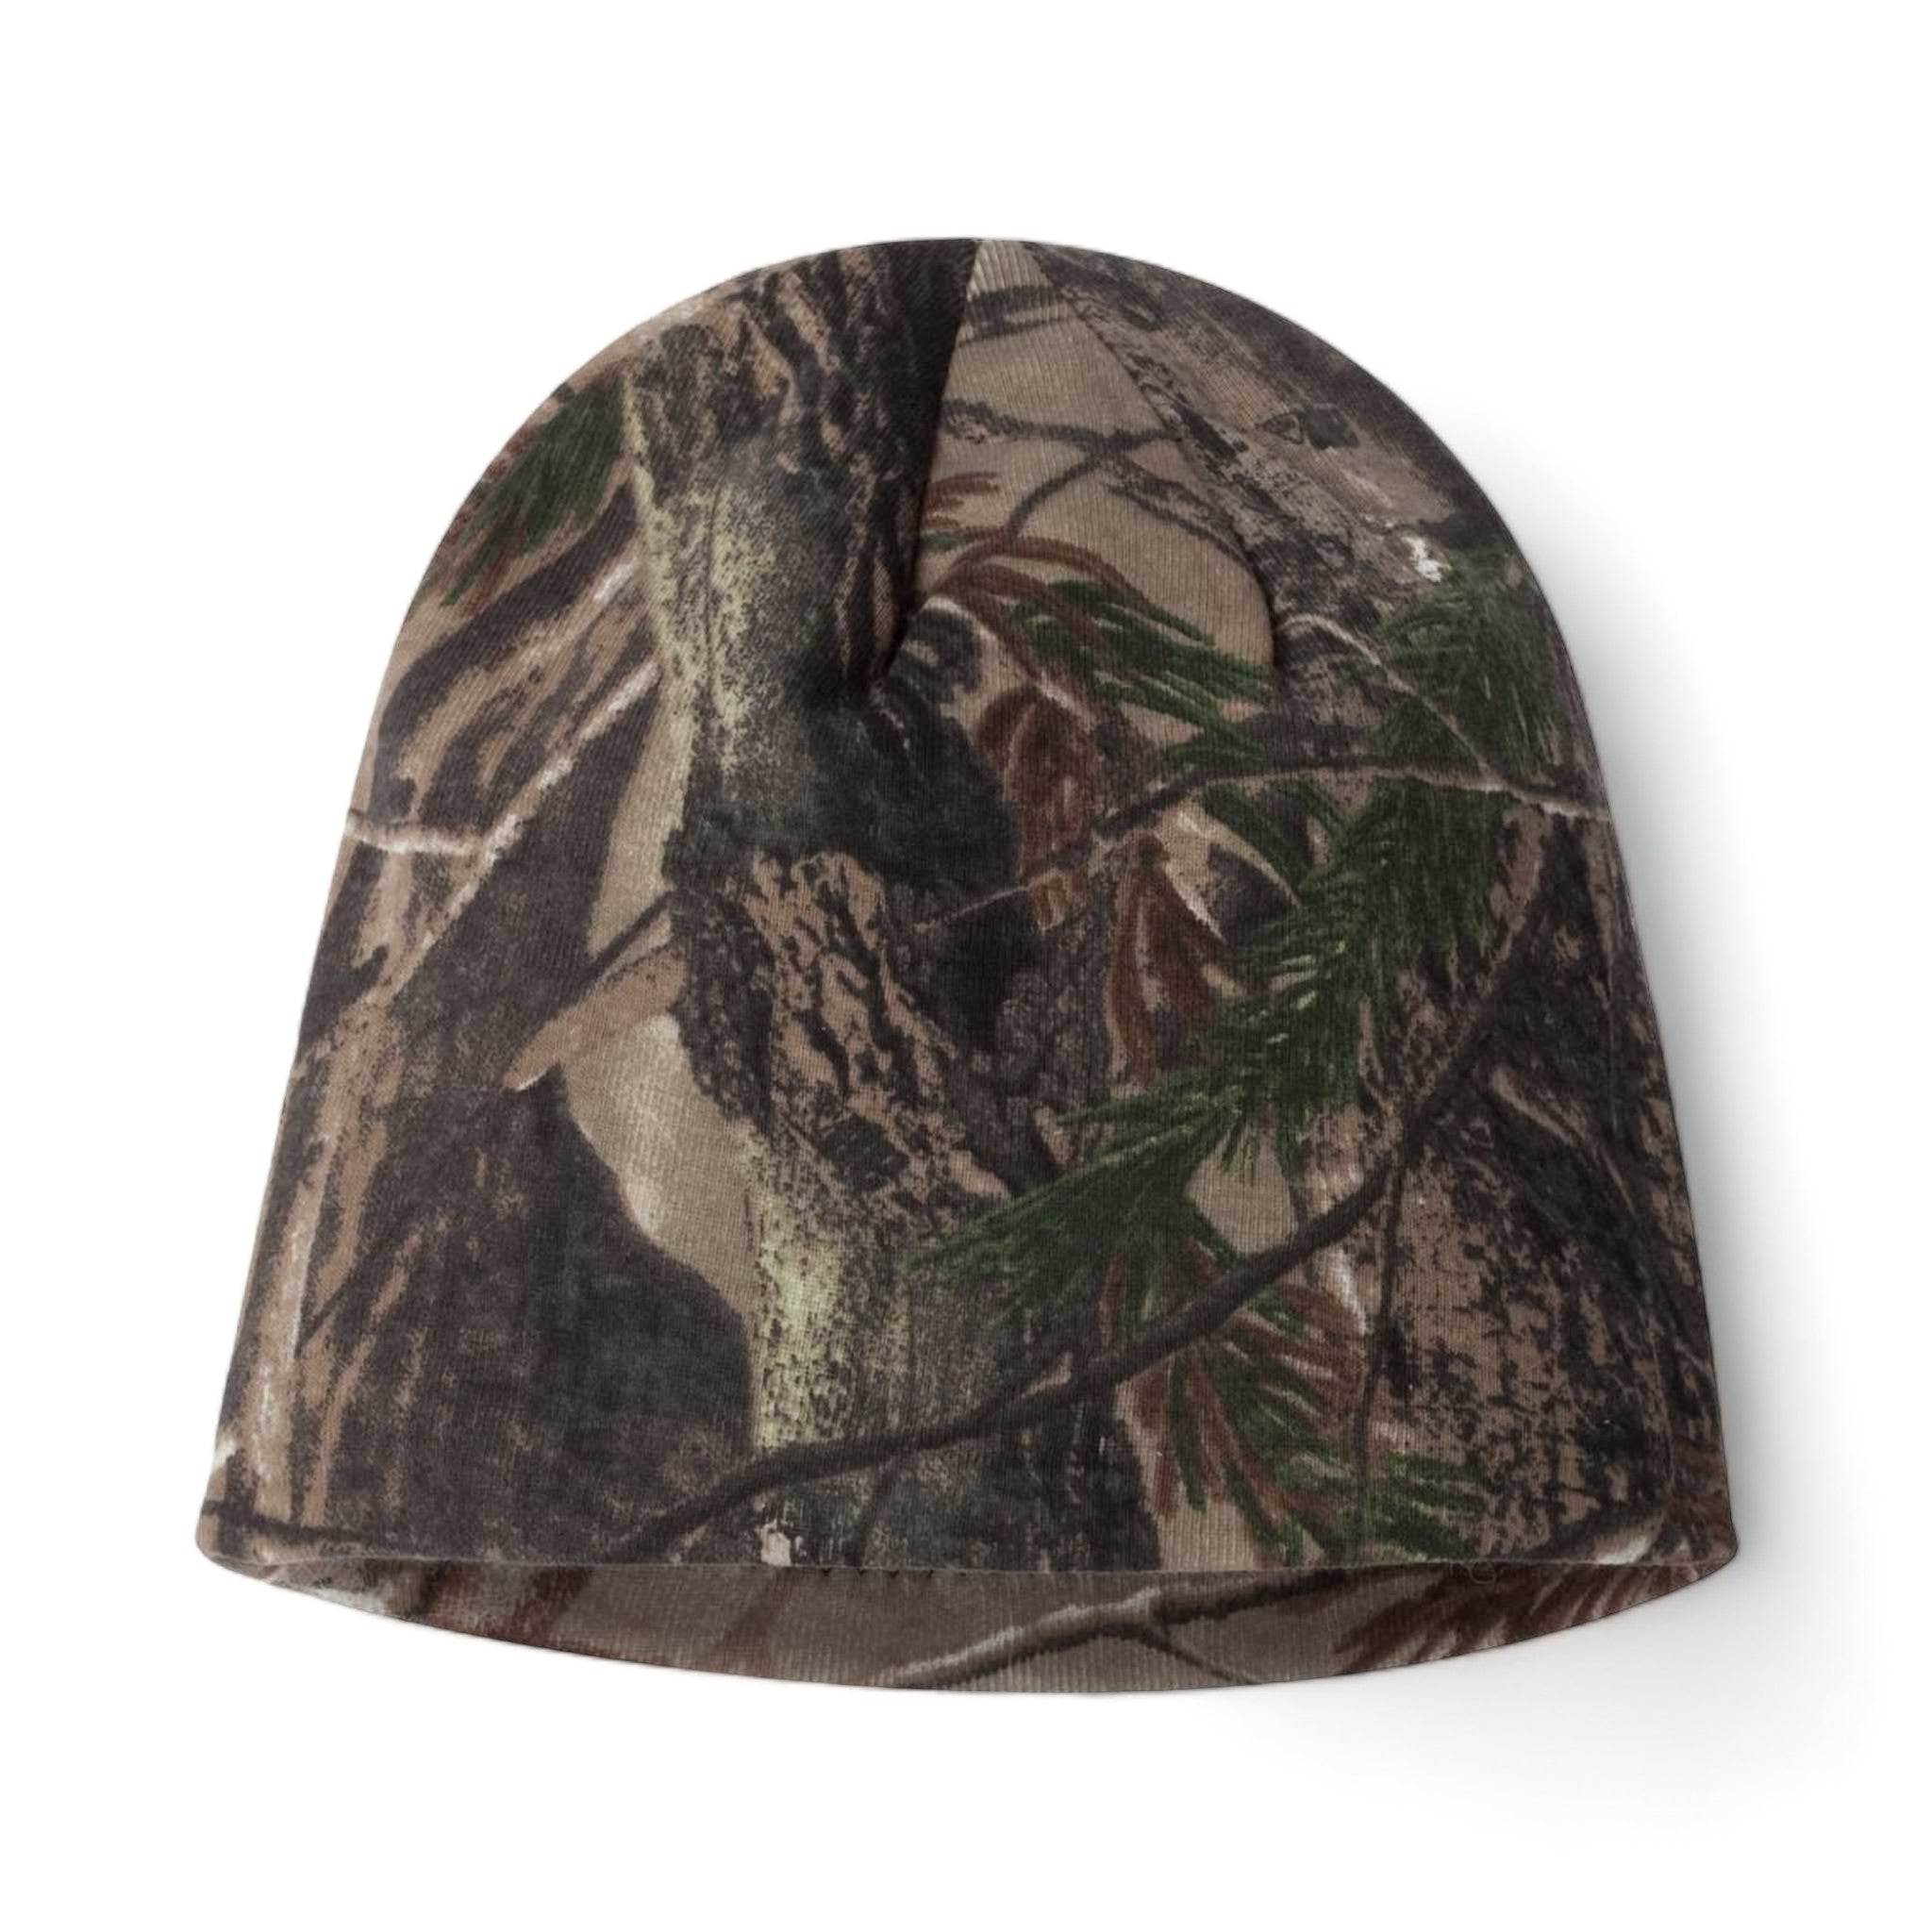 Front view of Kati LCB08 custom hat in realtree all purpose